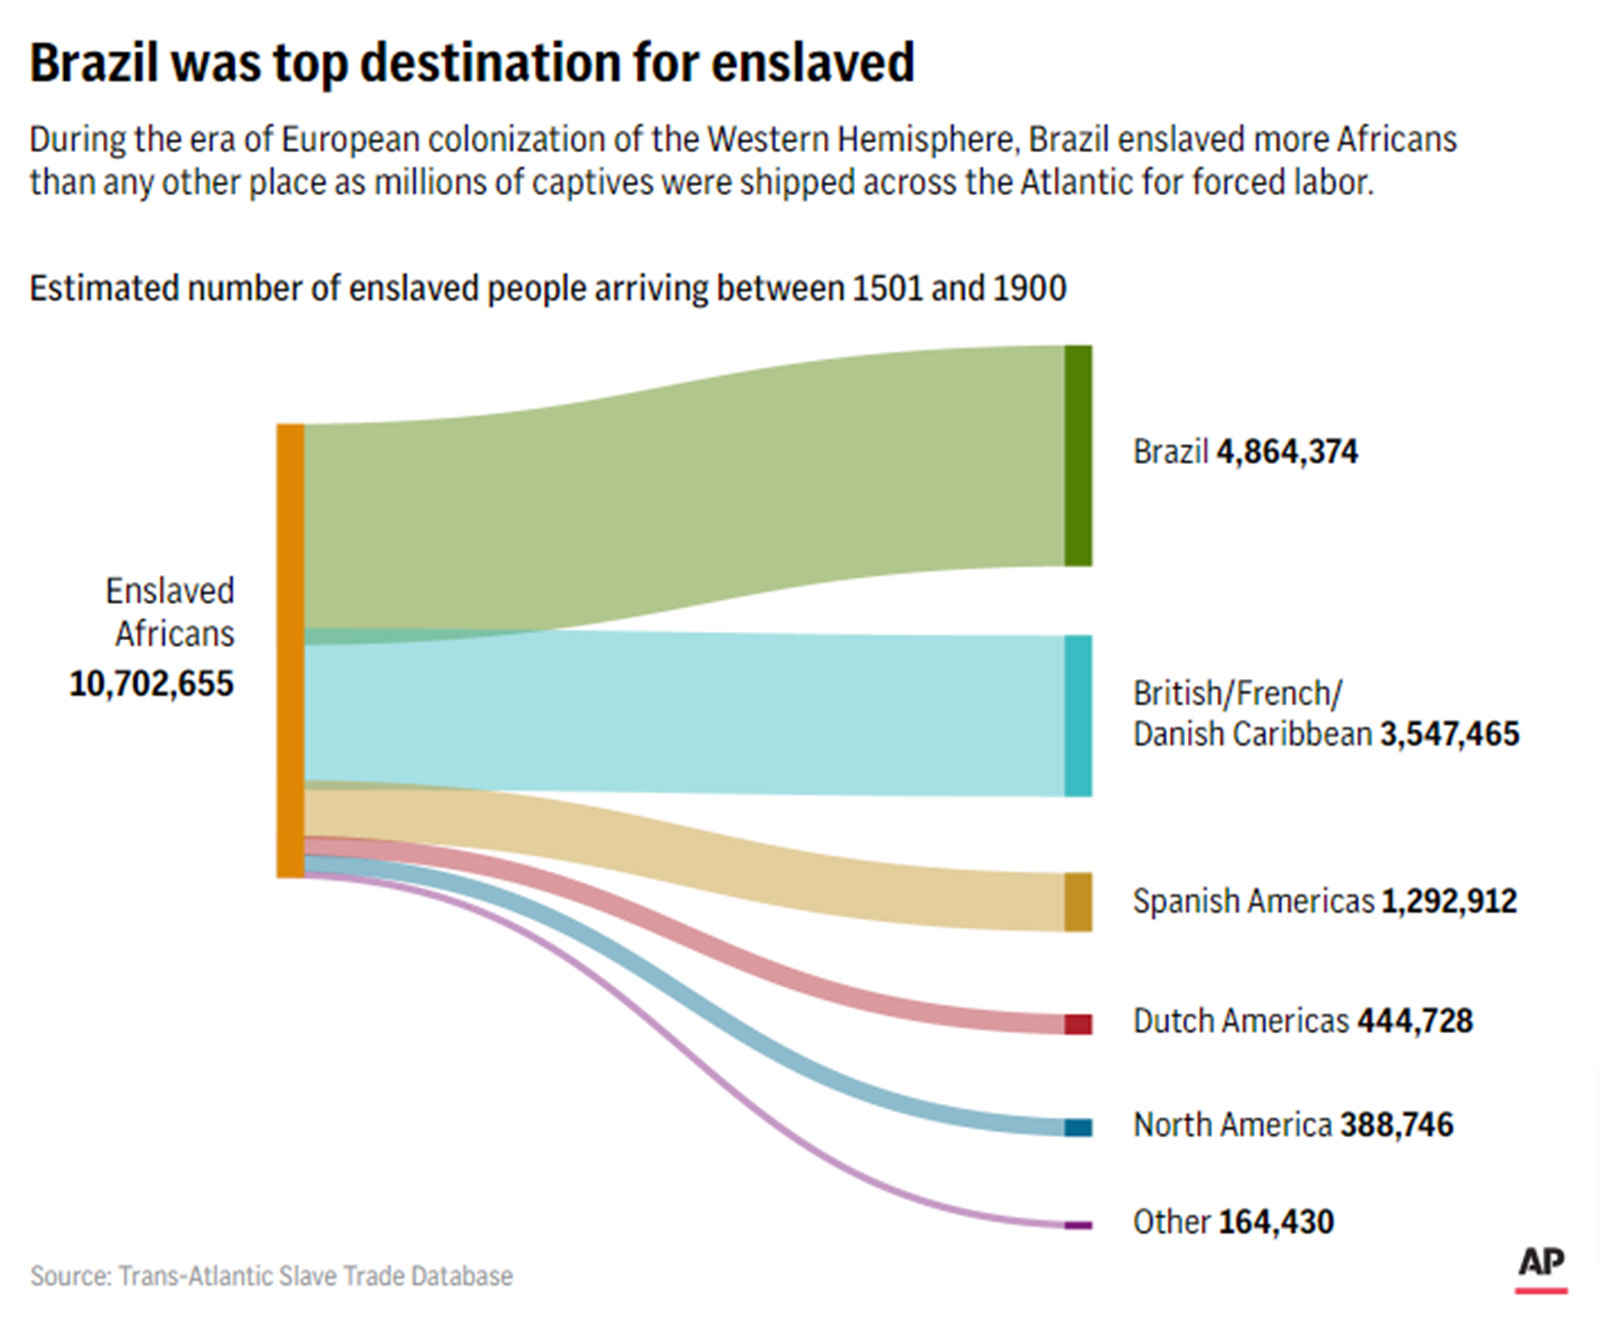 Brazil was top destination for enslaved. During the era of European colonization of the Western Hemisphere, Brazil enslaved more Africans than any other place as millions of captives were shipped across the Atlantic for forced labor. CHART: Estimated number of enslaved people arriving between 1501 and 1900. Source: Trans-Atlantic Slave Trade Database